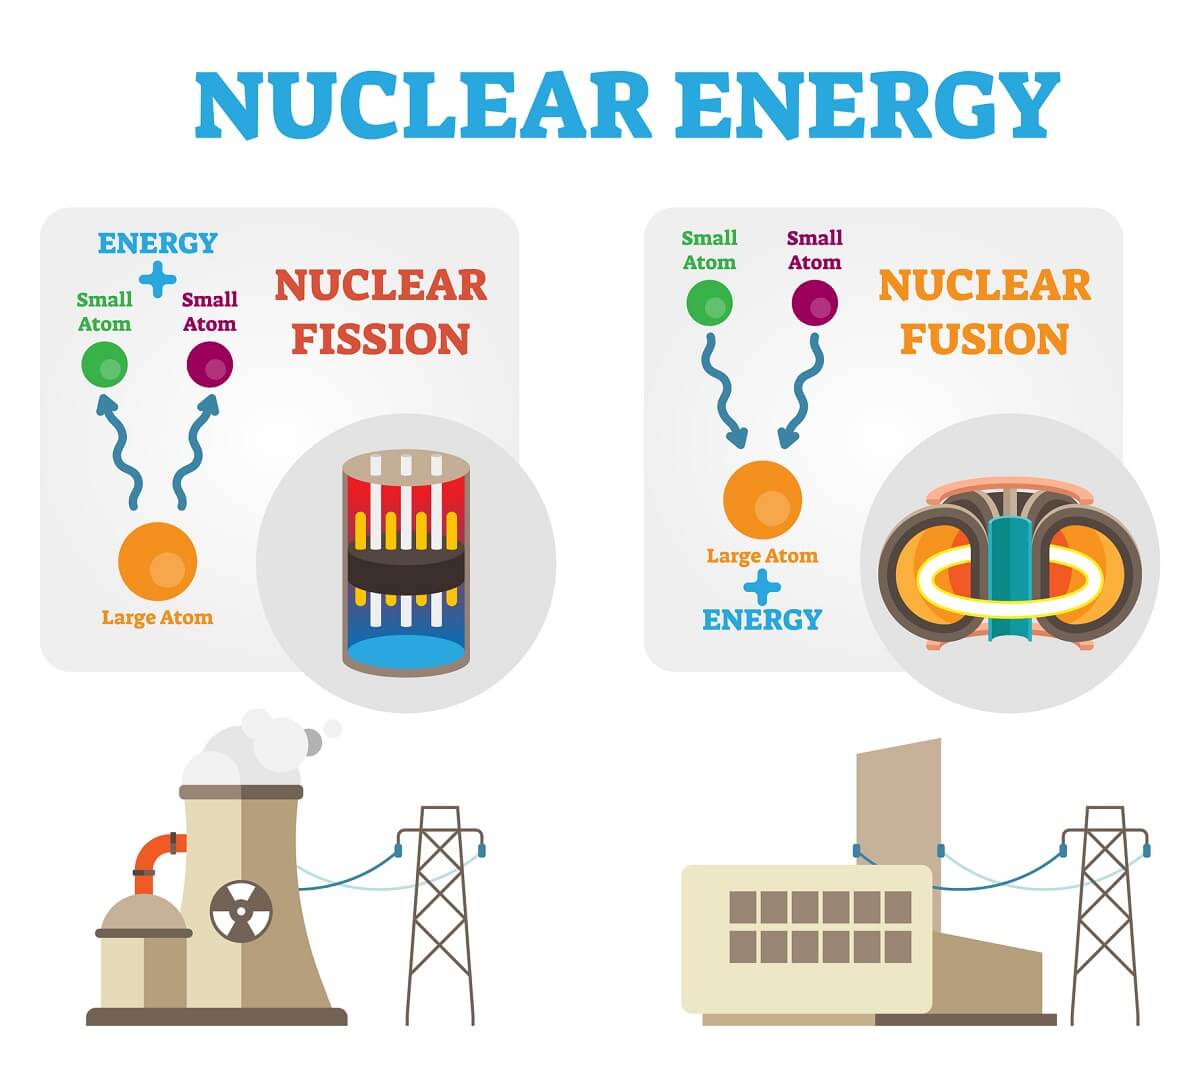 Nuclear energy: fission and fusion concept diagram